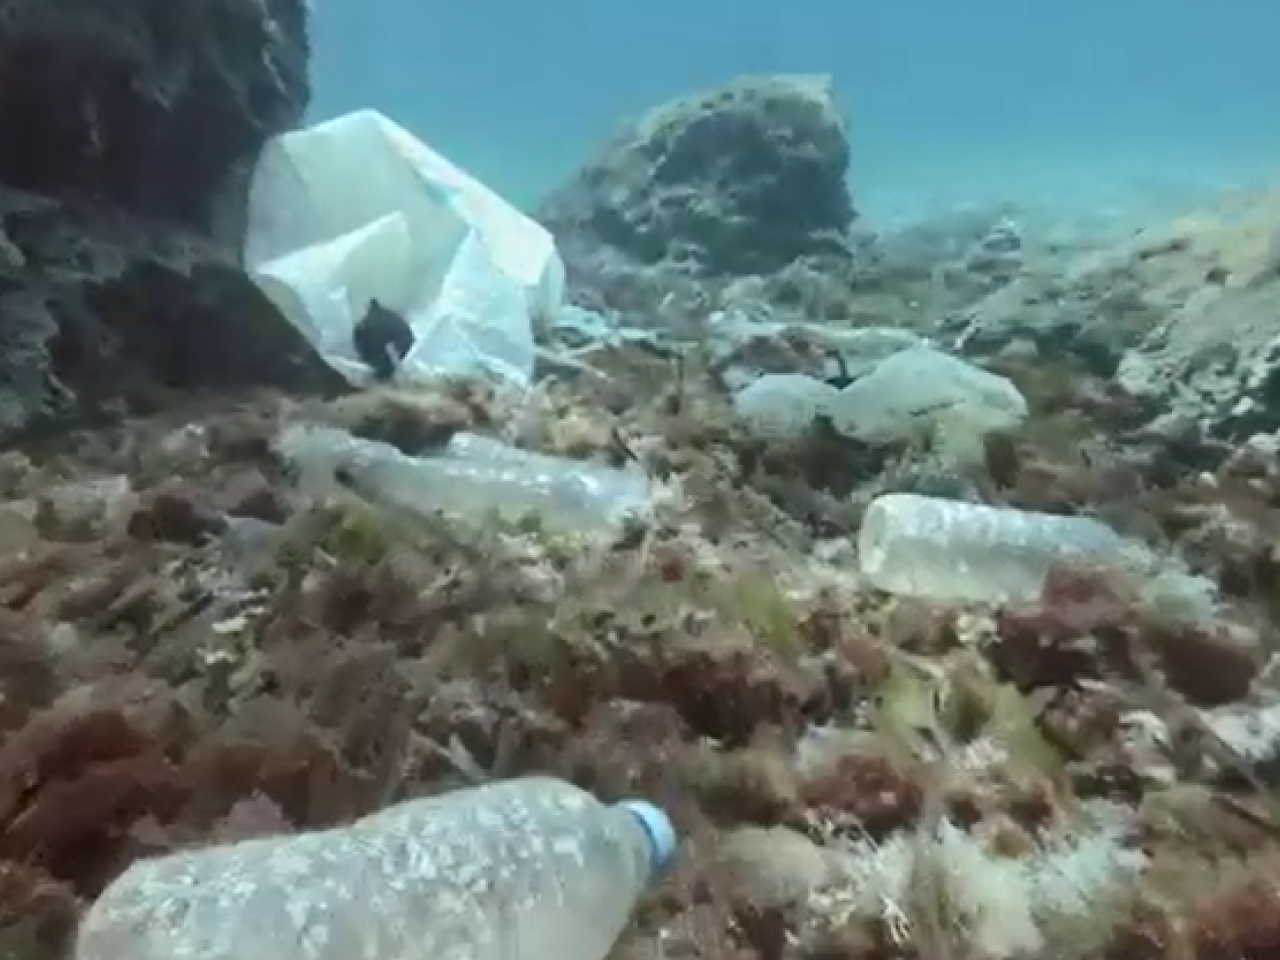 Plastic bottles on the floor of a shallow body of water.